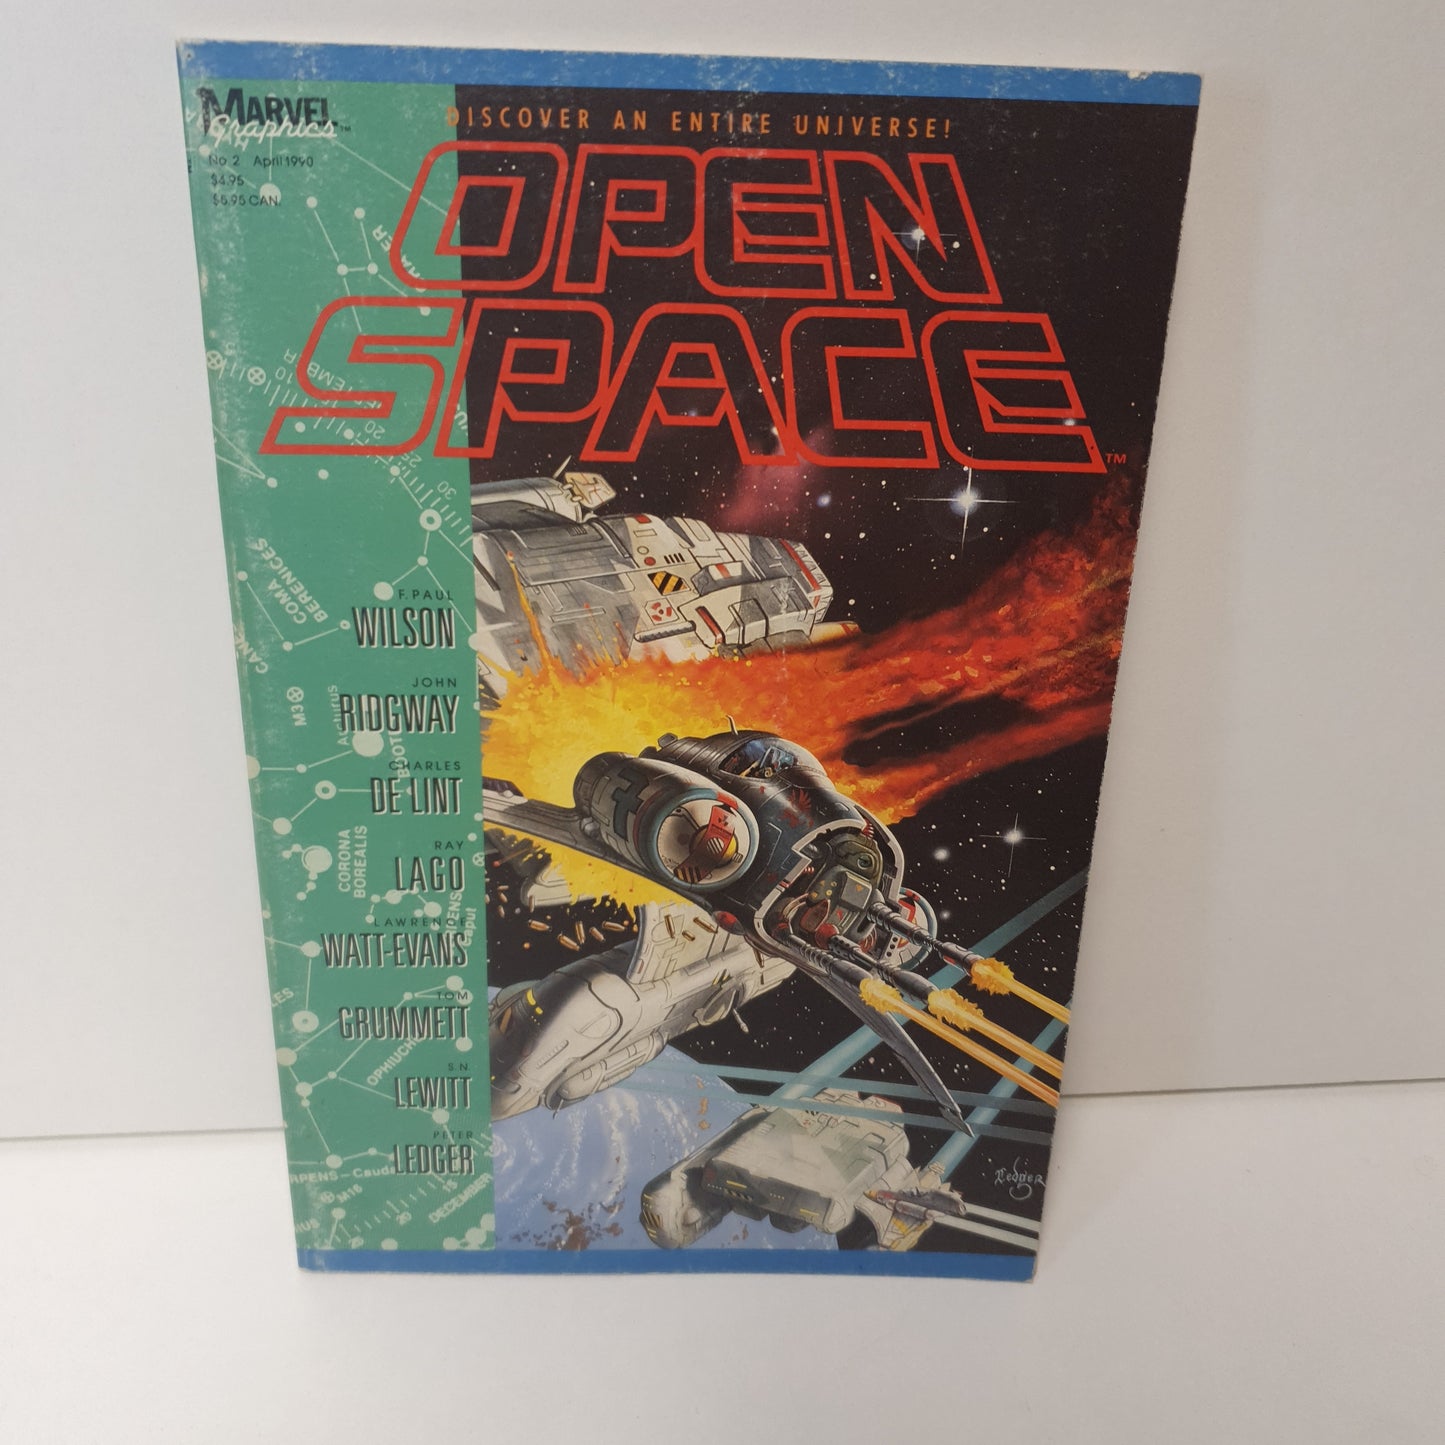 Open Space vol 1 No. 2 by F Paul Wilson (April 1990)